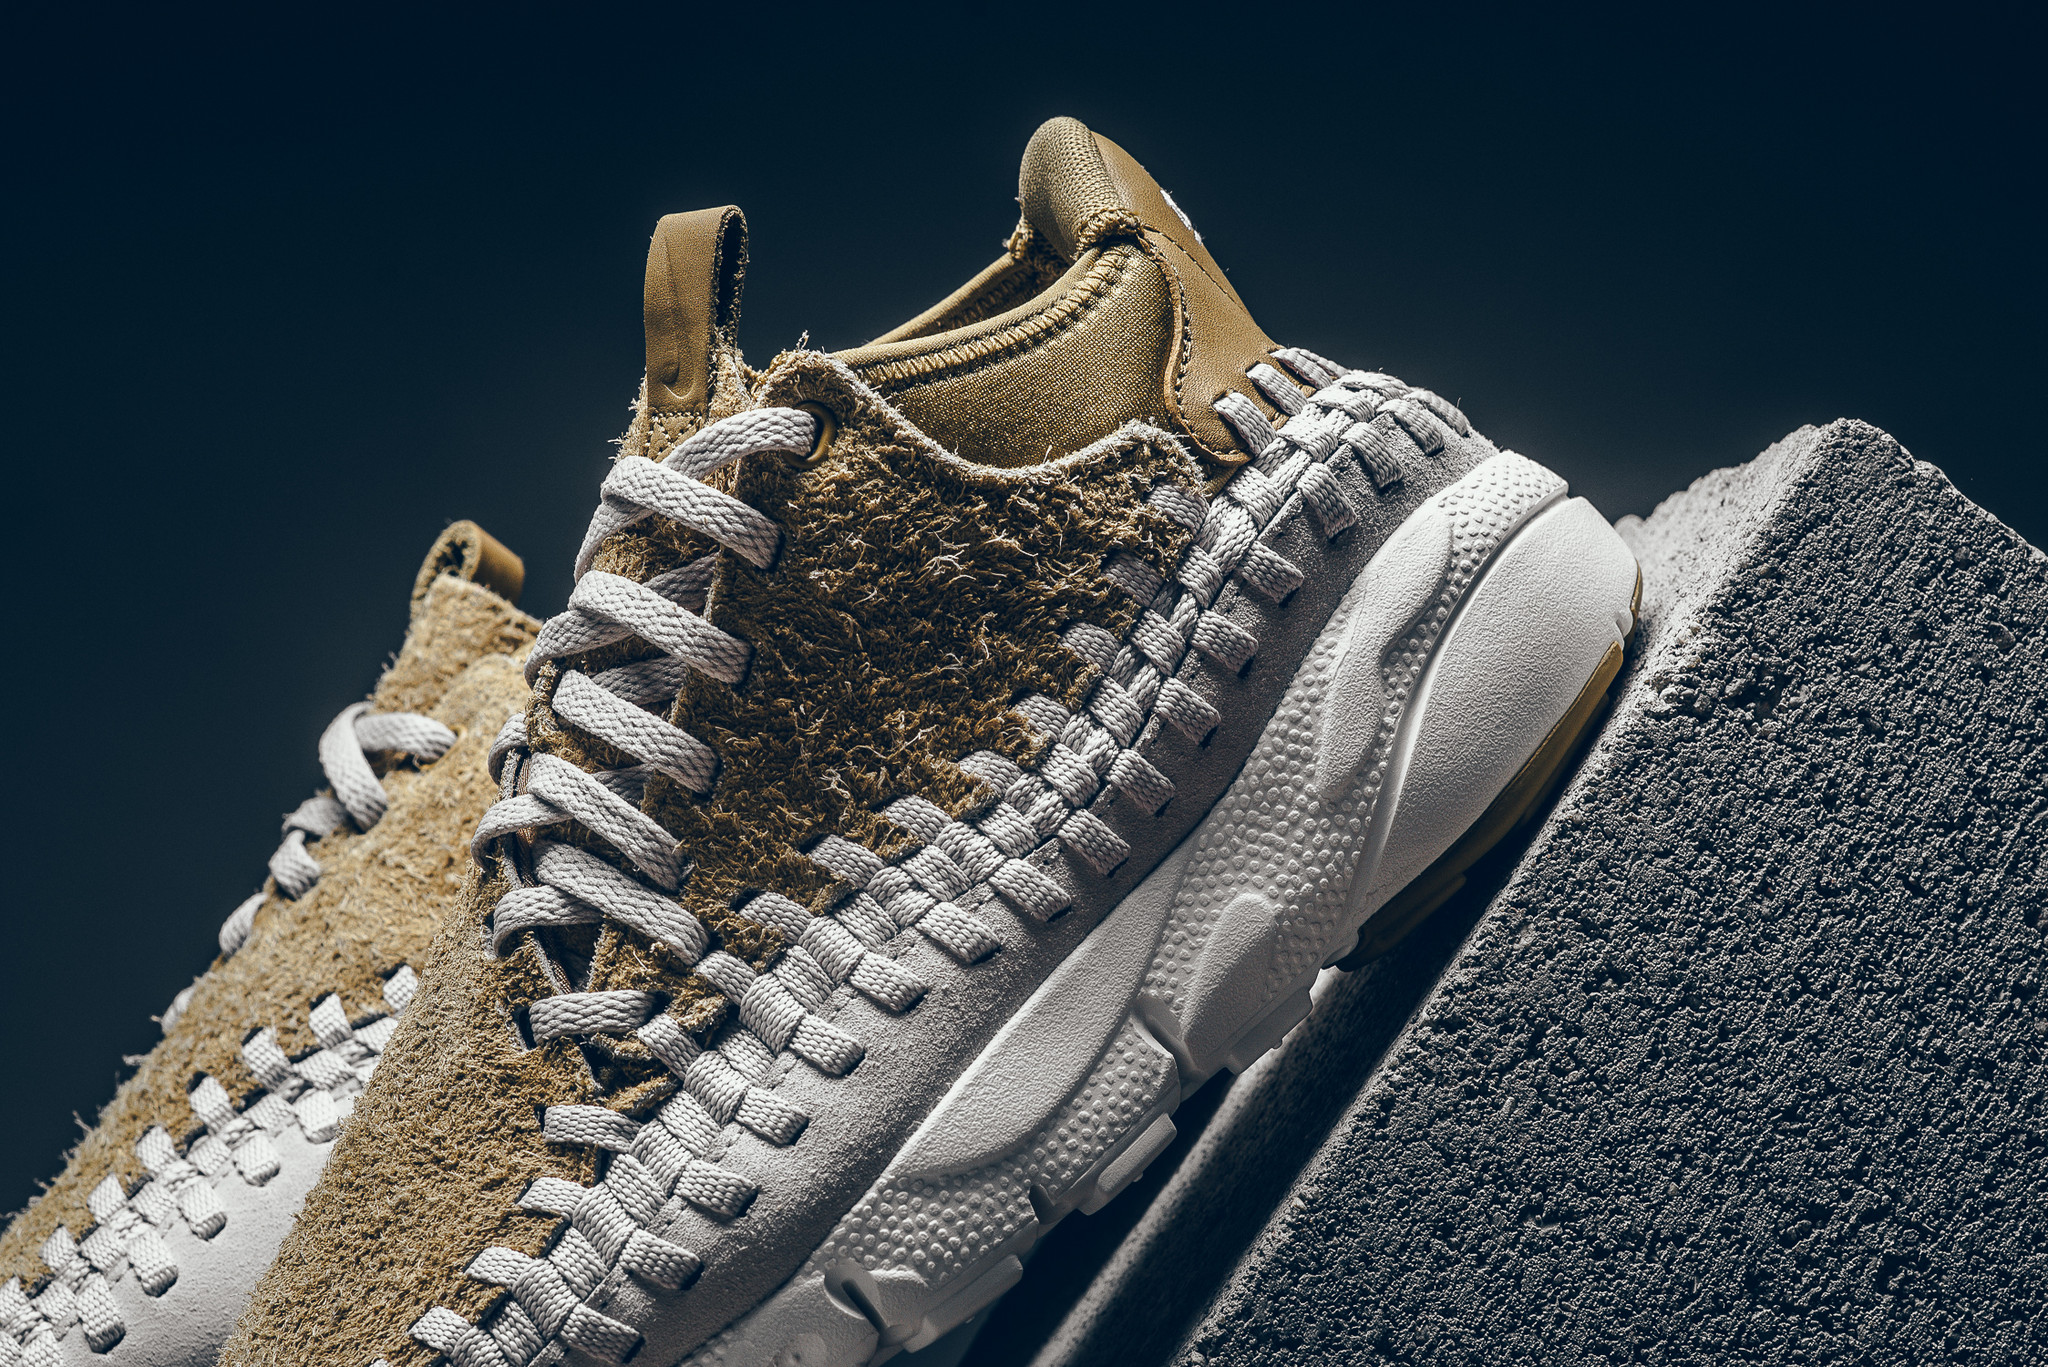 Nike Air Footscape Woven Chukka Releasing in New Colorways This Week ...